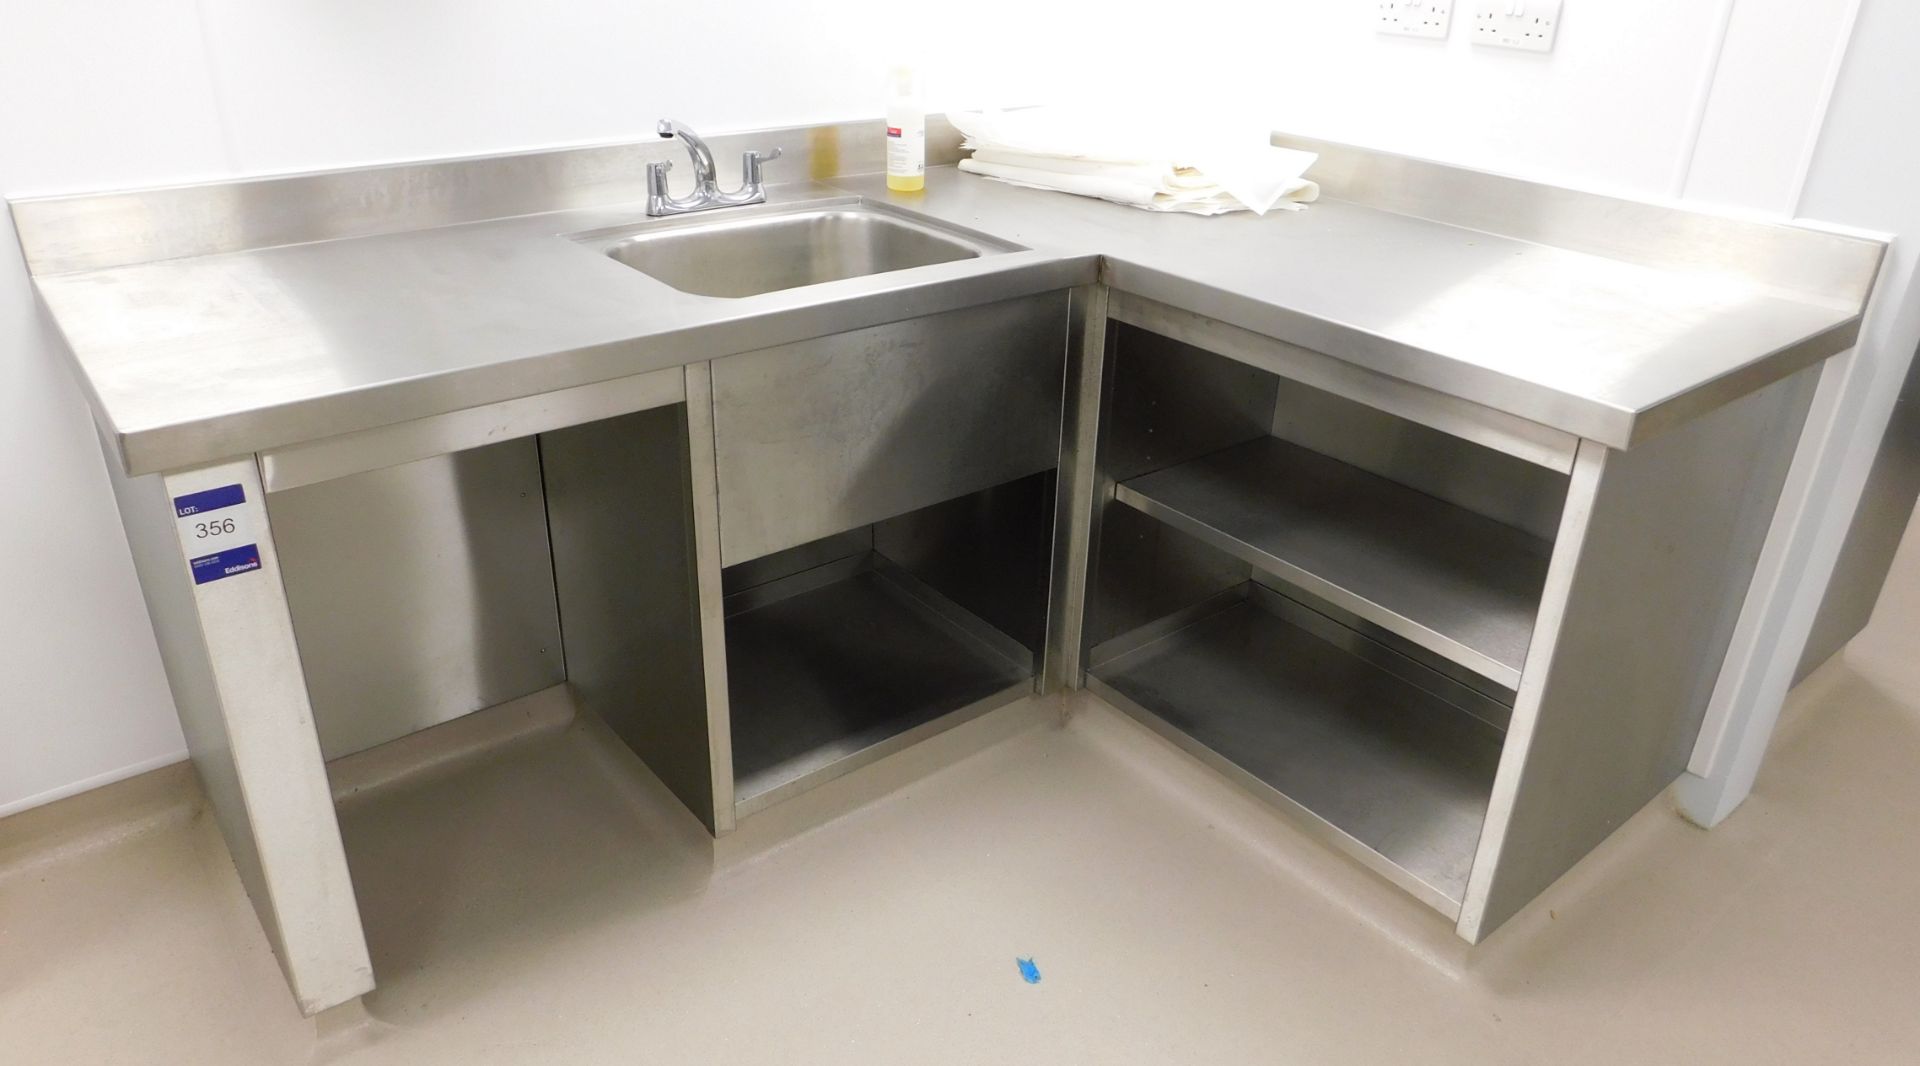 Fitted L-Shaped Stainless Steel Corner Bench with Deep Well Sink (requires disconnection)